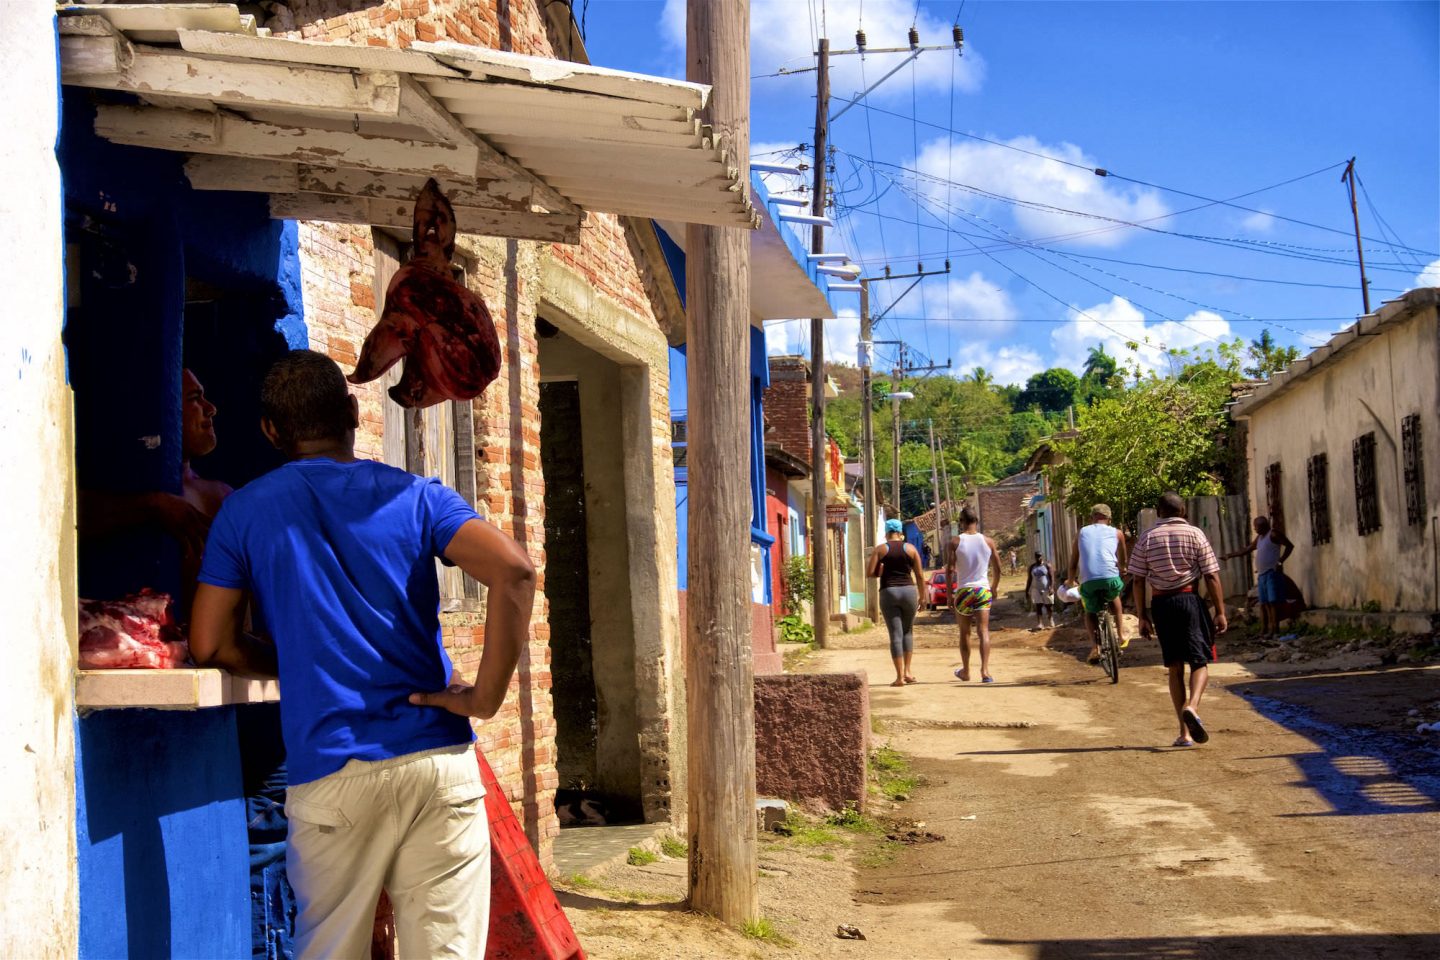 Meat for sale in Trinidad. Daily life in Cuba.